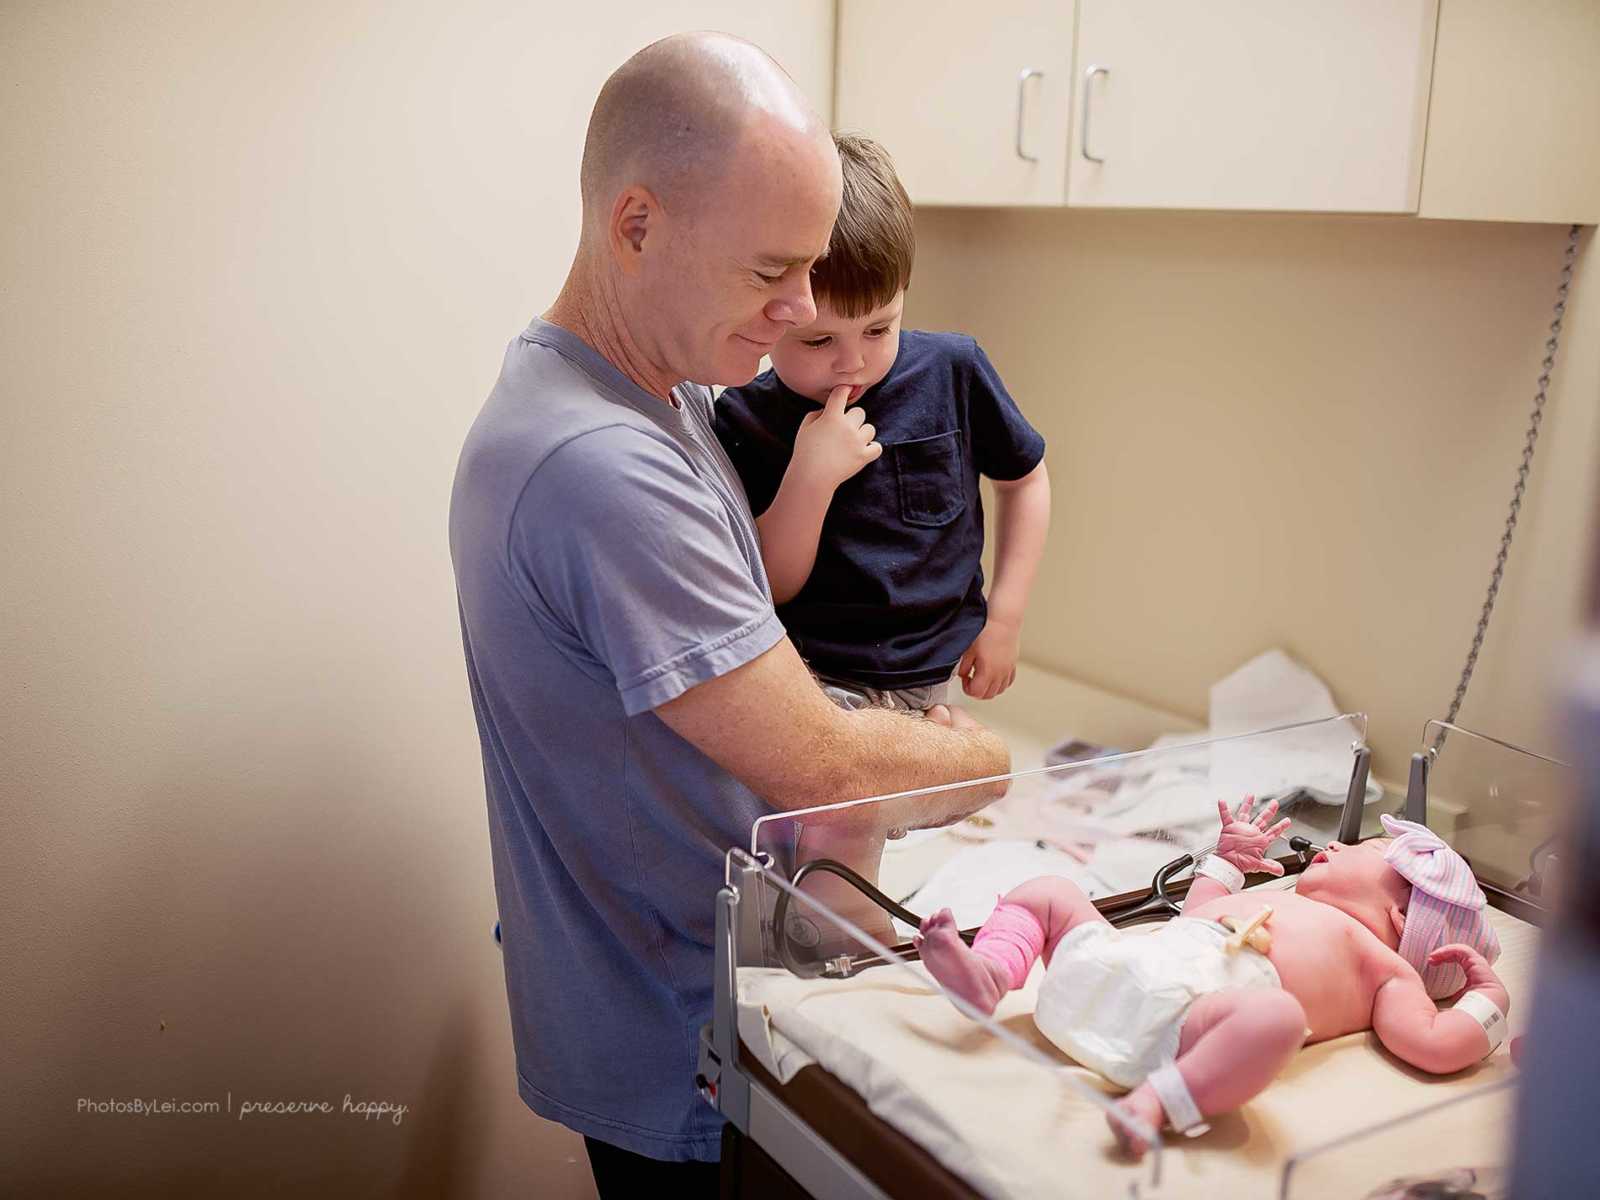 Father of newborn covered in amniotic fluid holds son to look at his new sibling